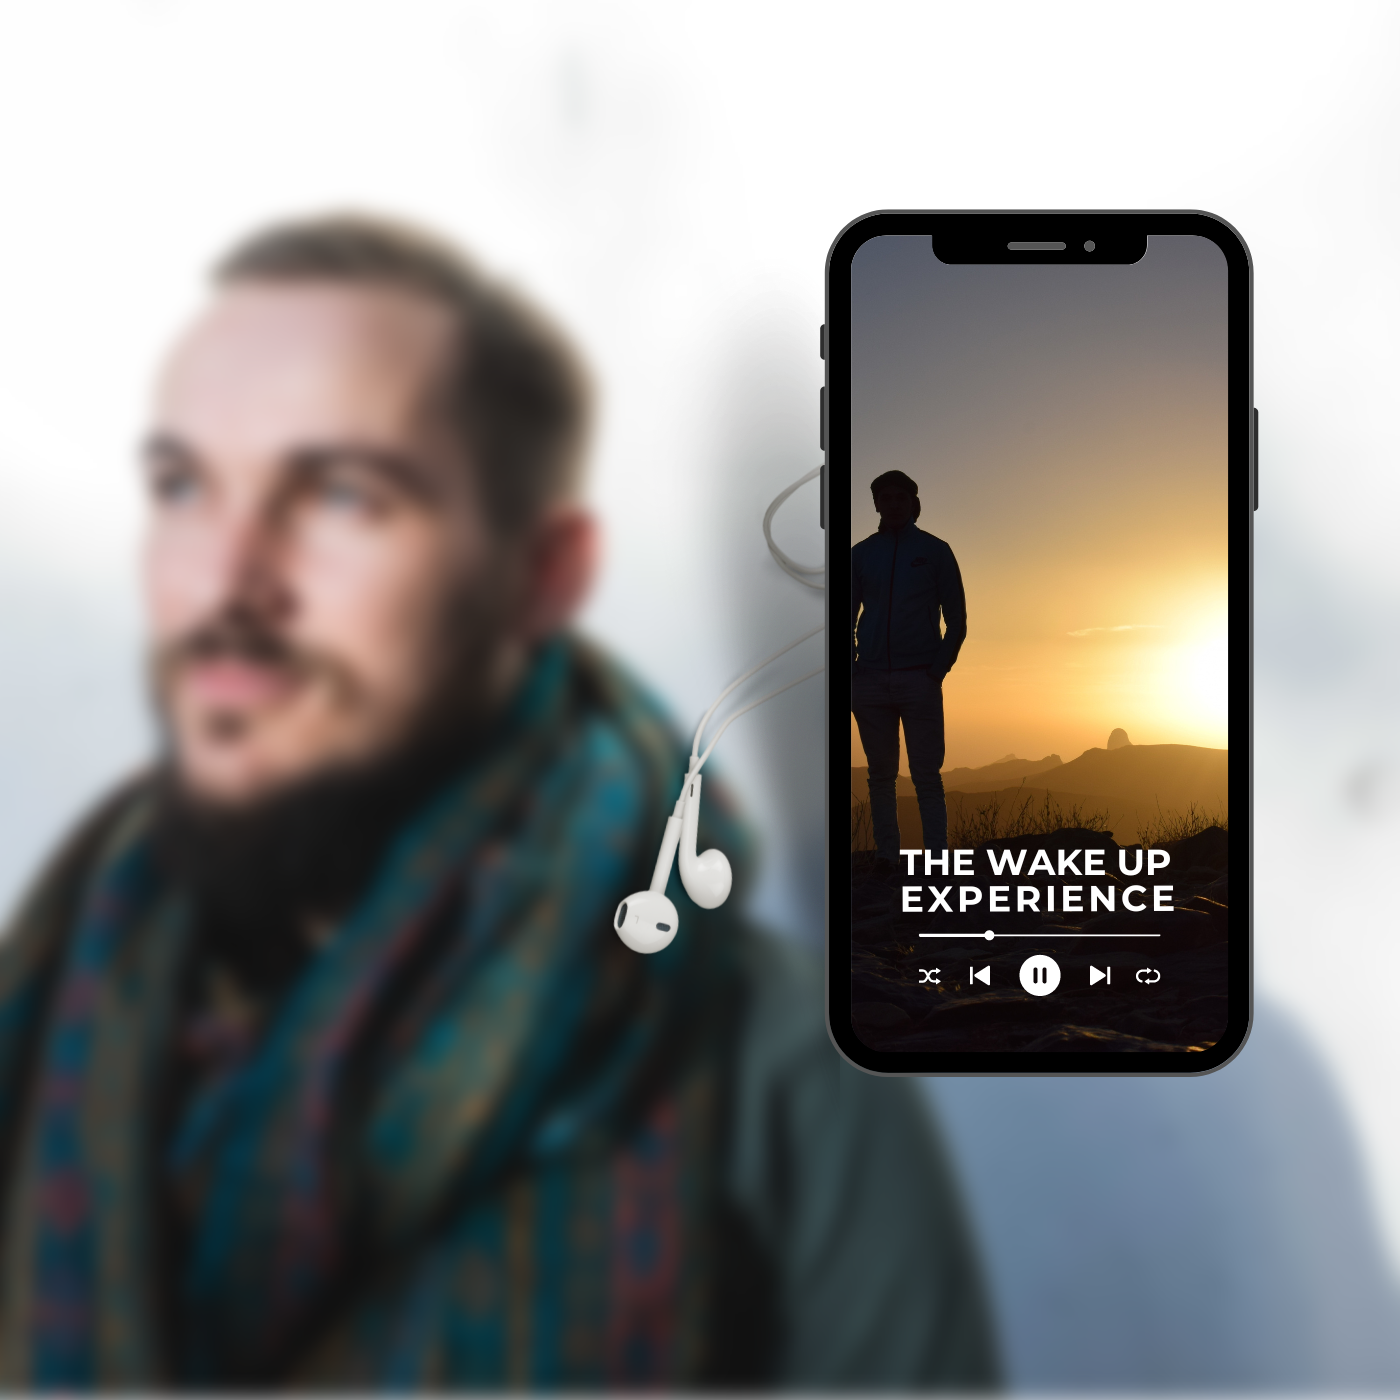 Mobile Phone Album Cover with Clouds and Silhouette